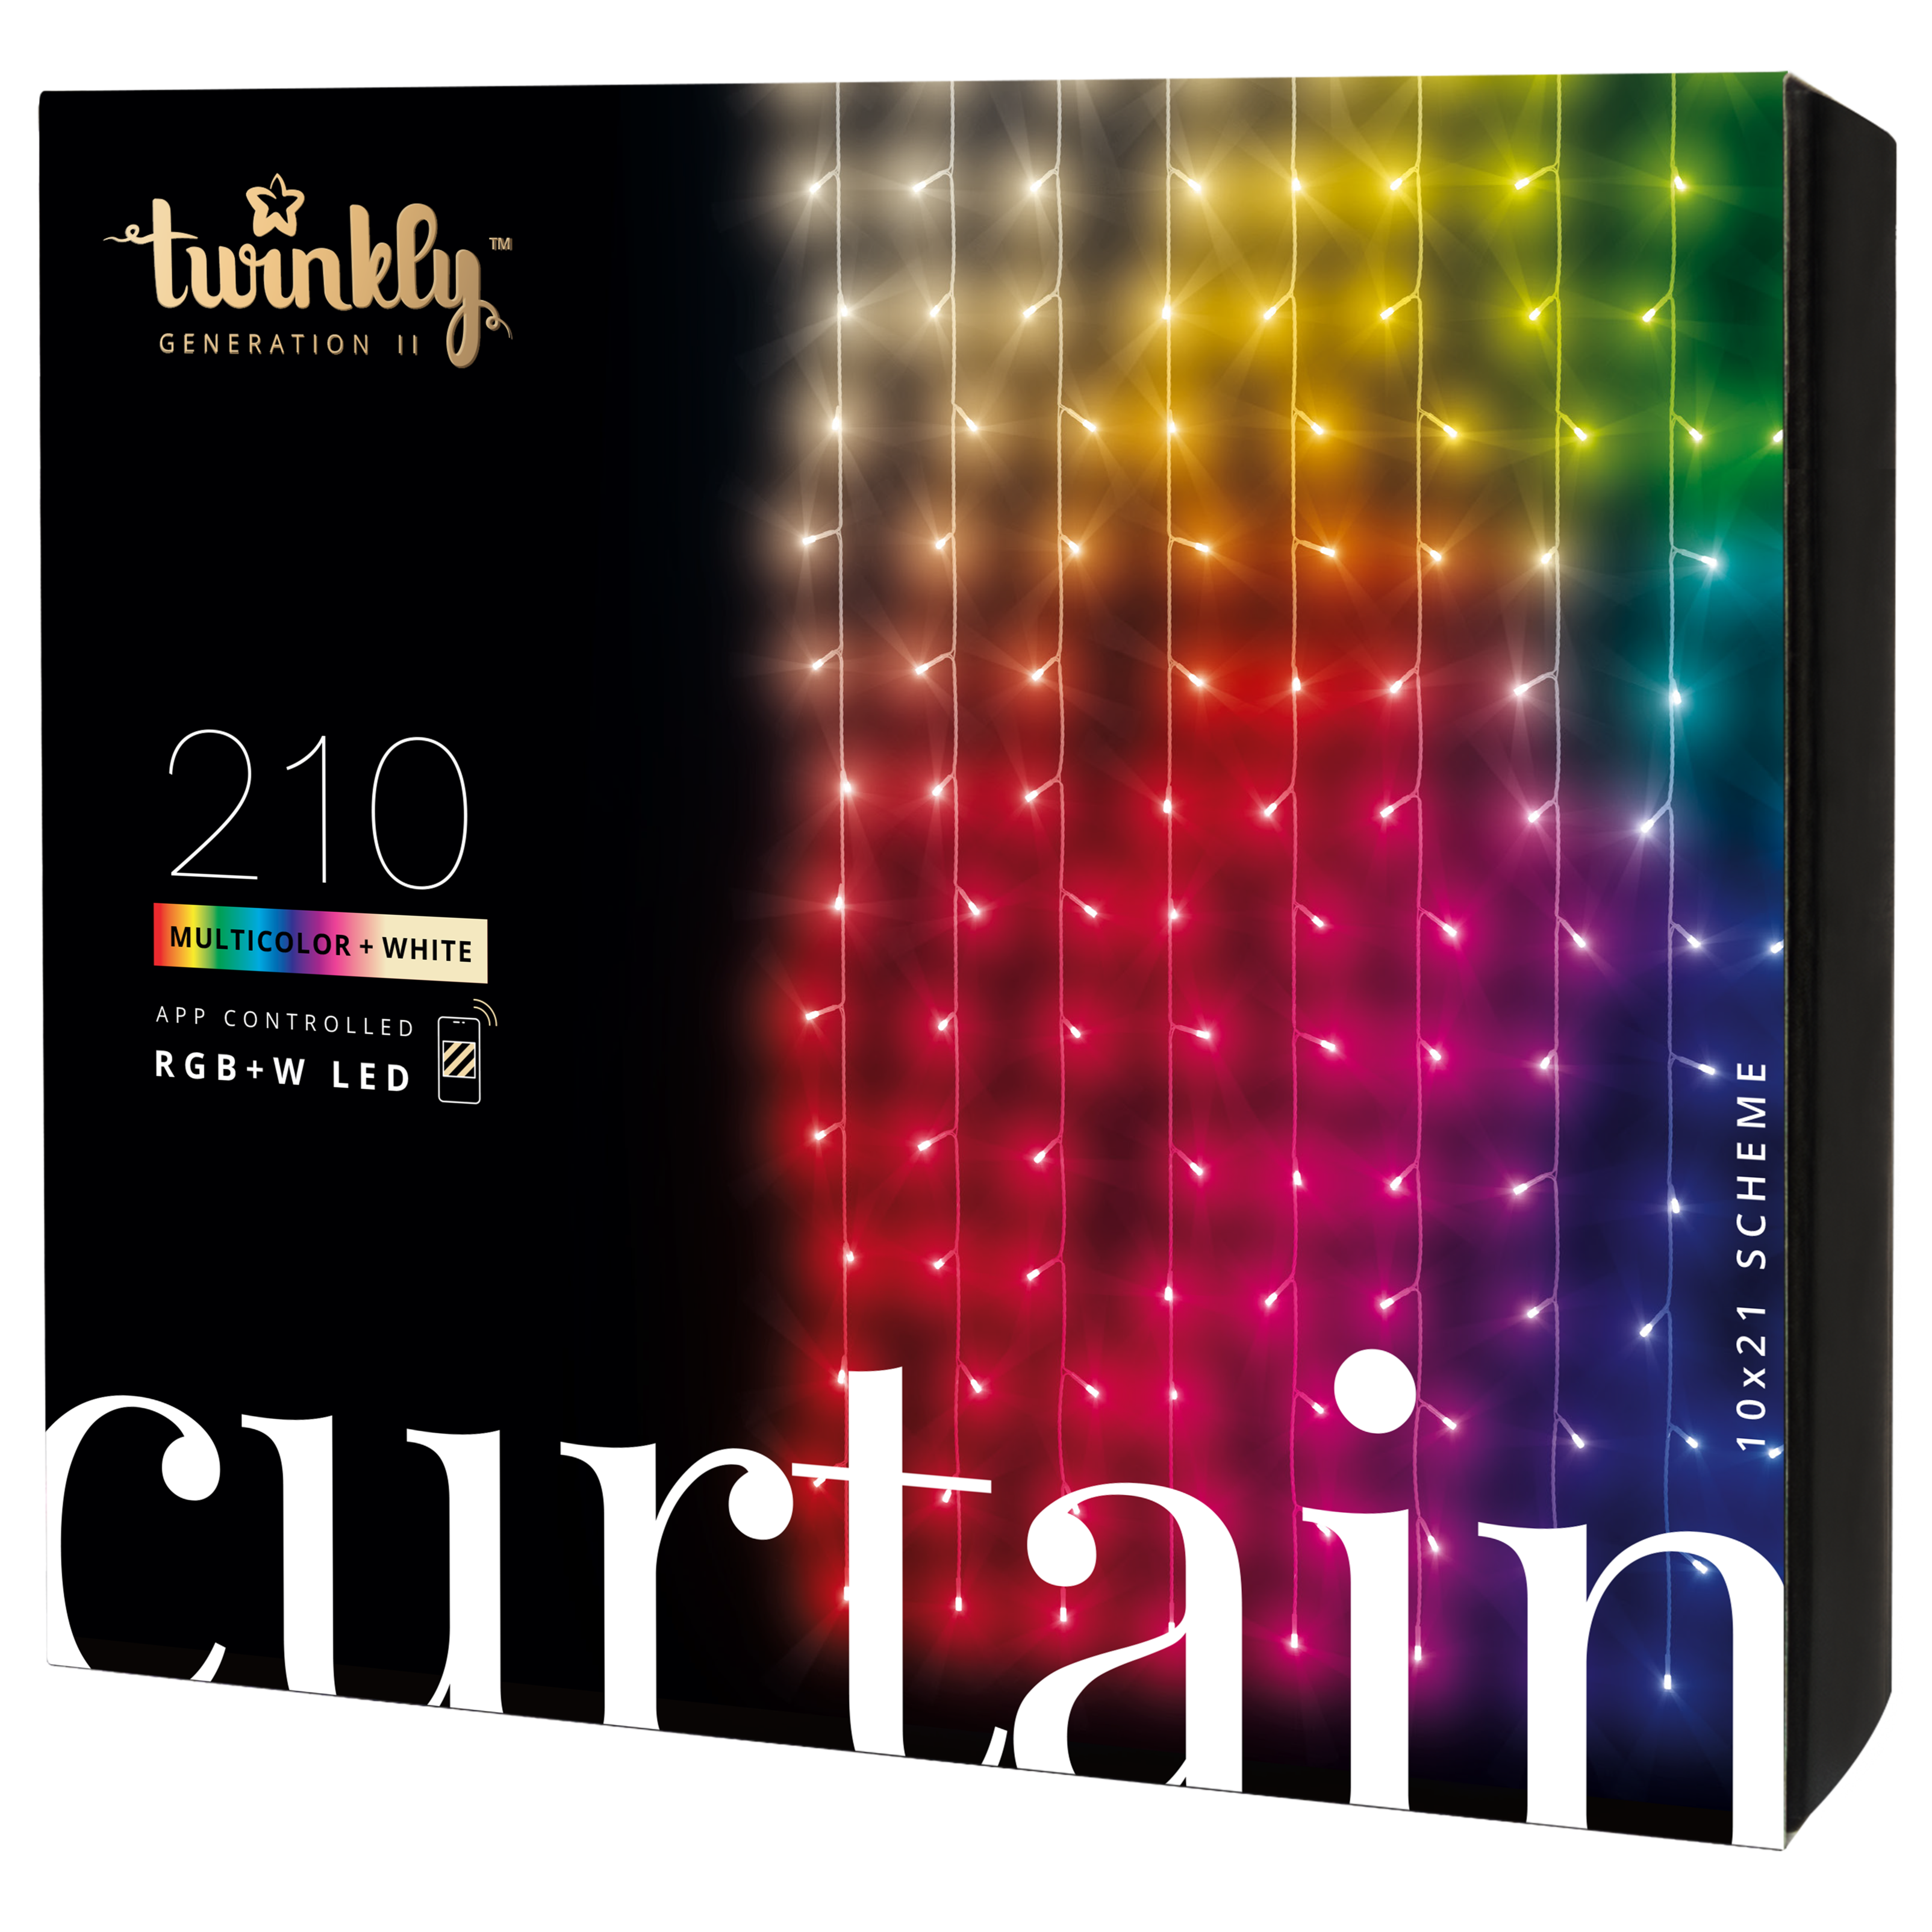 Curtain installation with 210 LEDs Curtain type